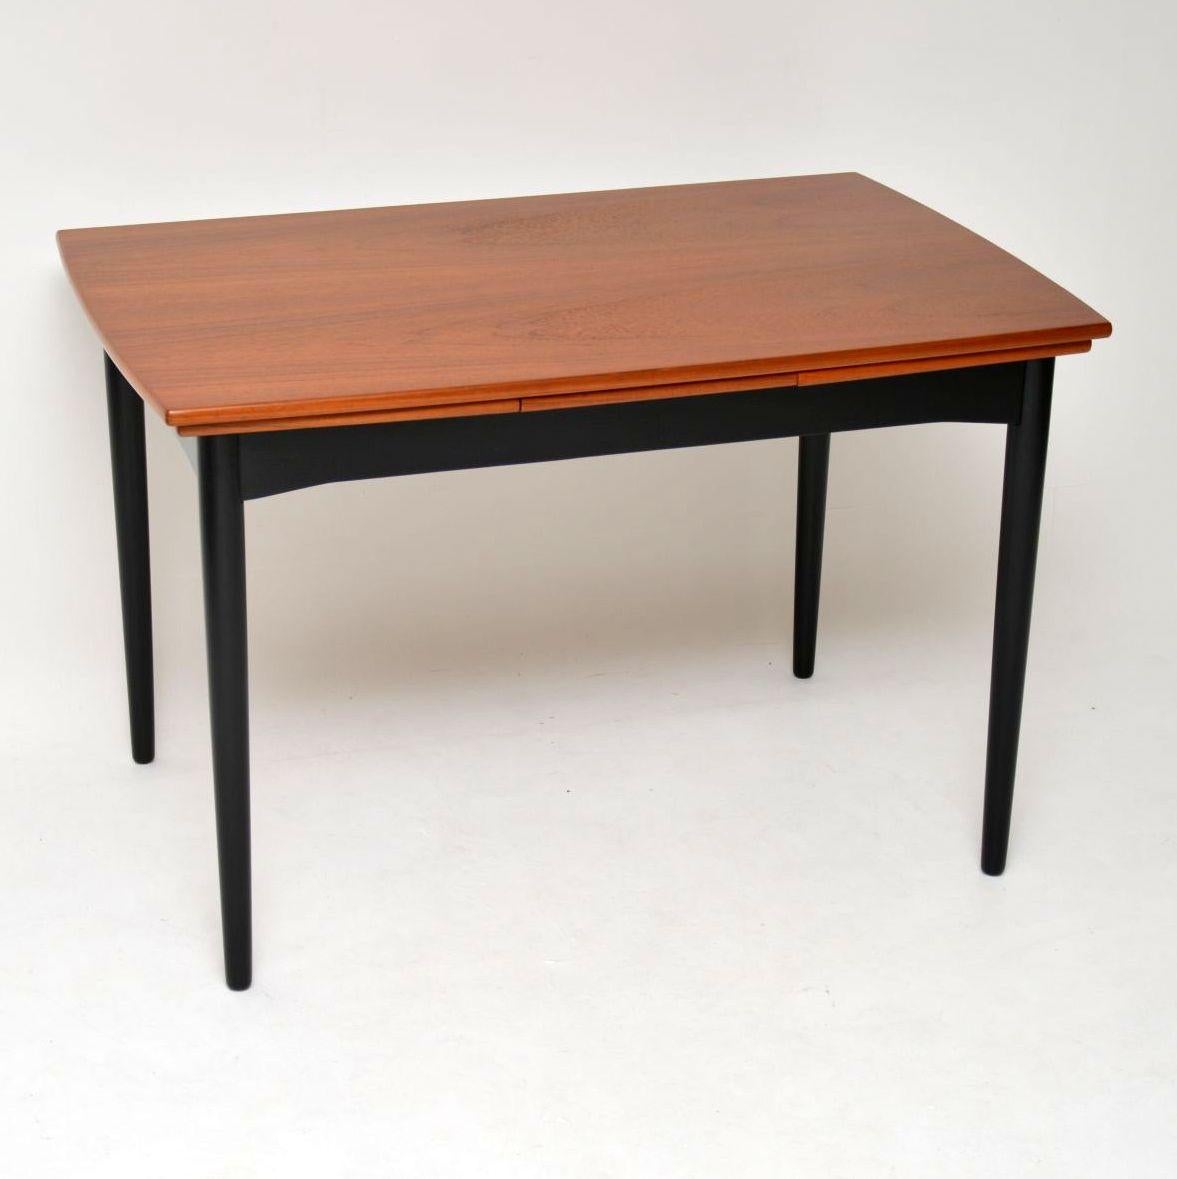 A beautiful and very well made vintage dining table made in Denmark, dating from the 1960s. It has a gorgeous teak top with two slides out leaves to extend the surface. The base is ebonised and the legs can be removed for ease of transport. We have